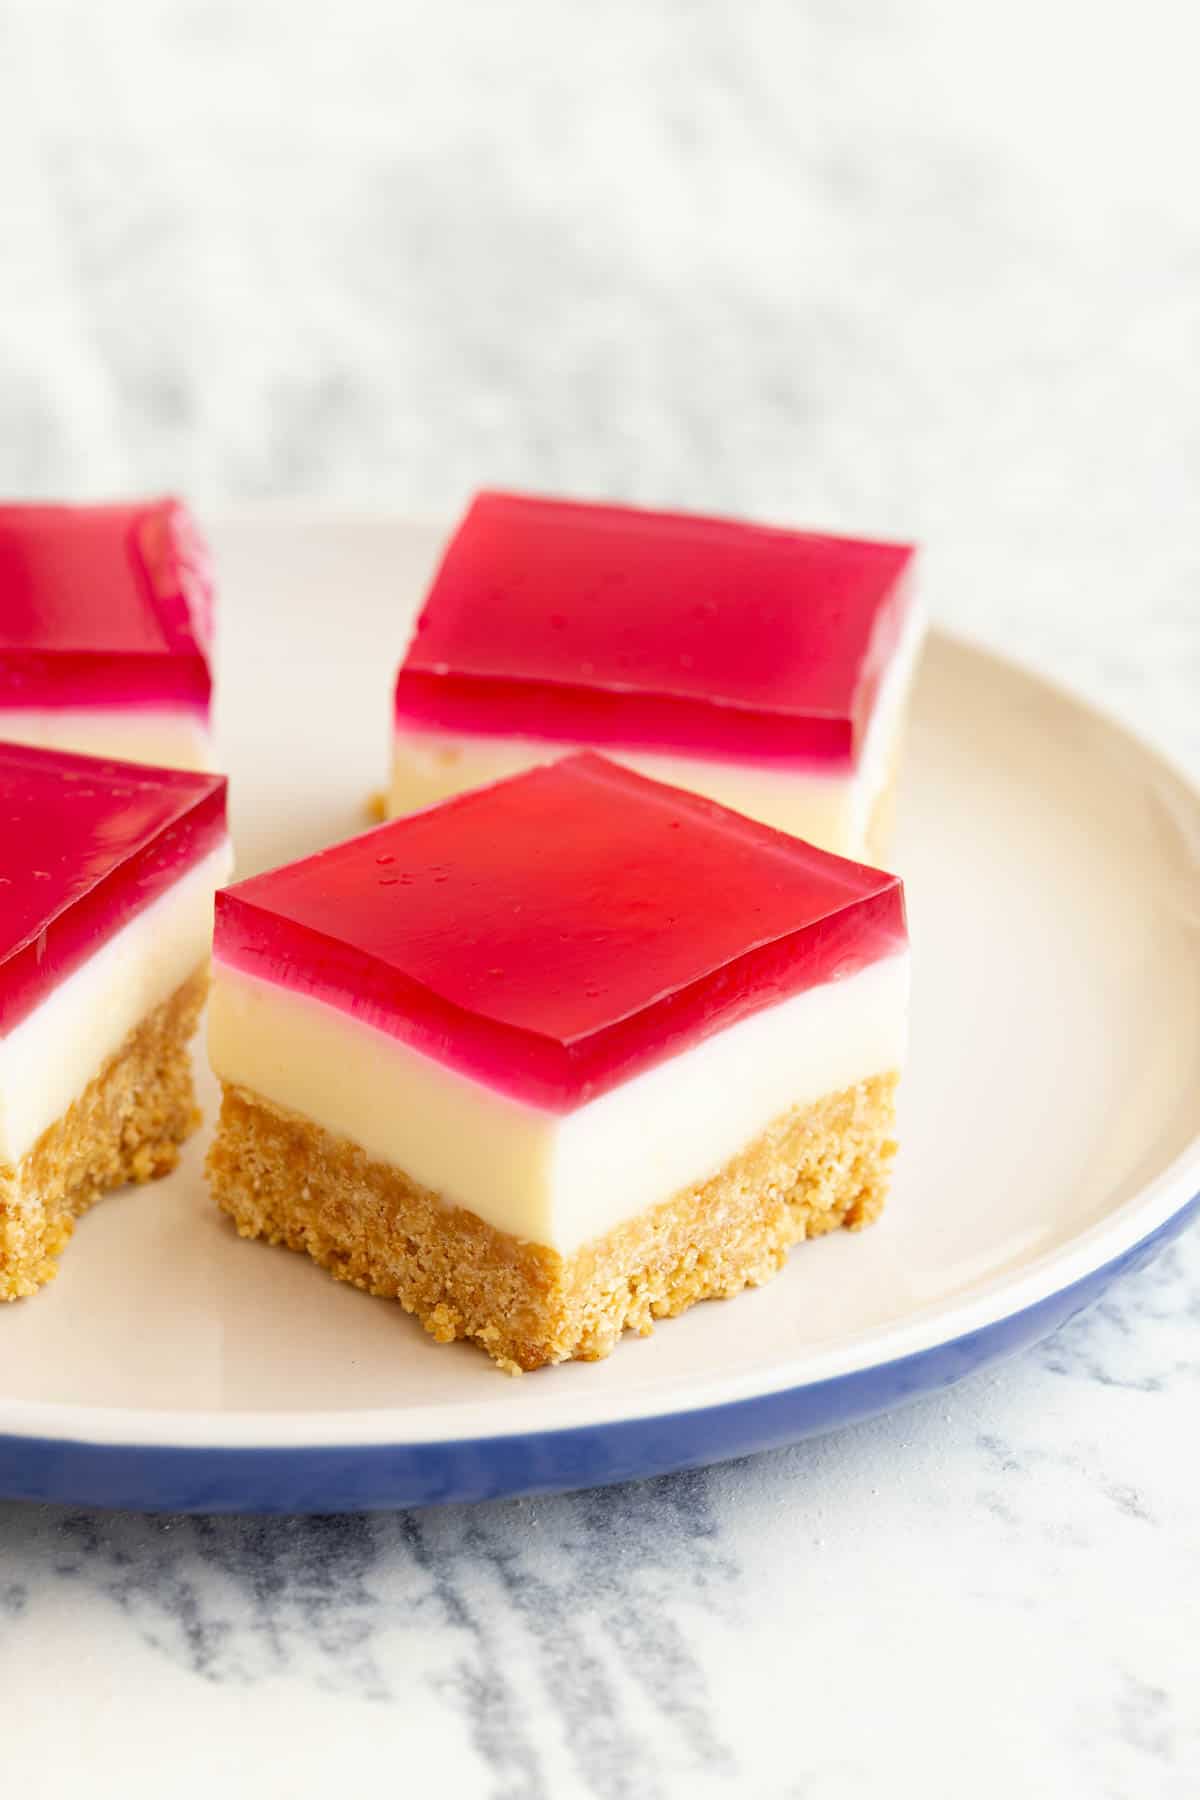 A plate of jelly slice bites, complete with red jelly topping.